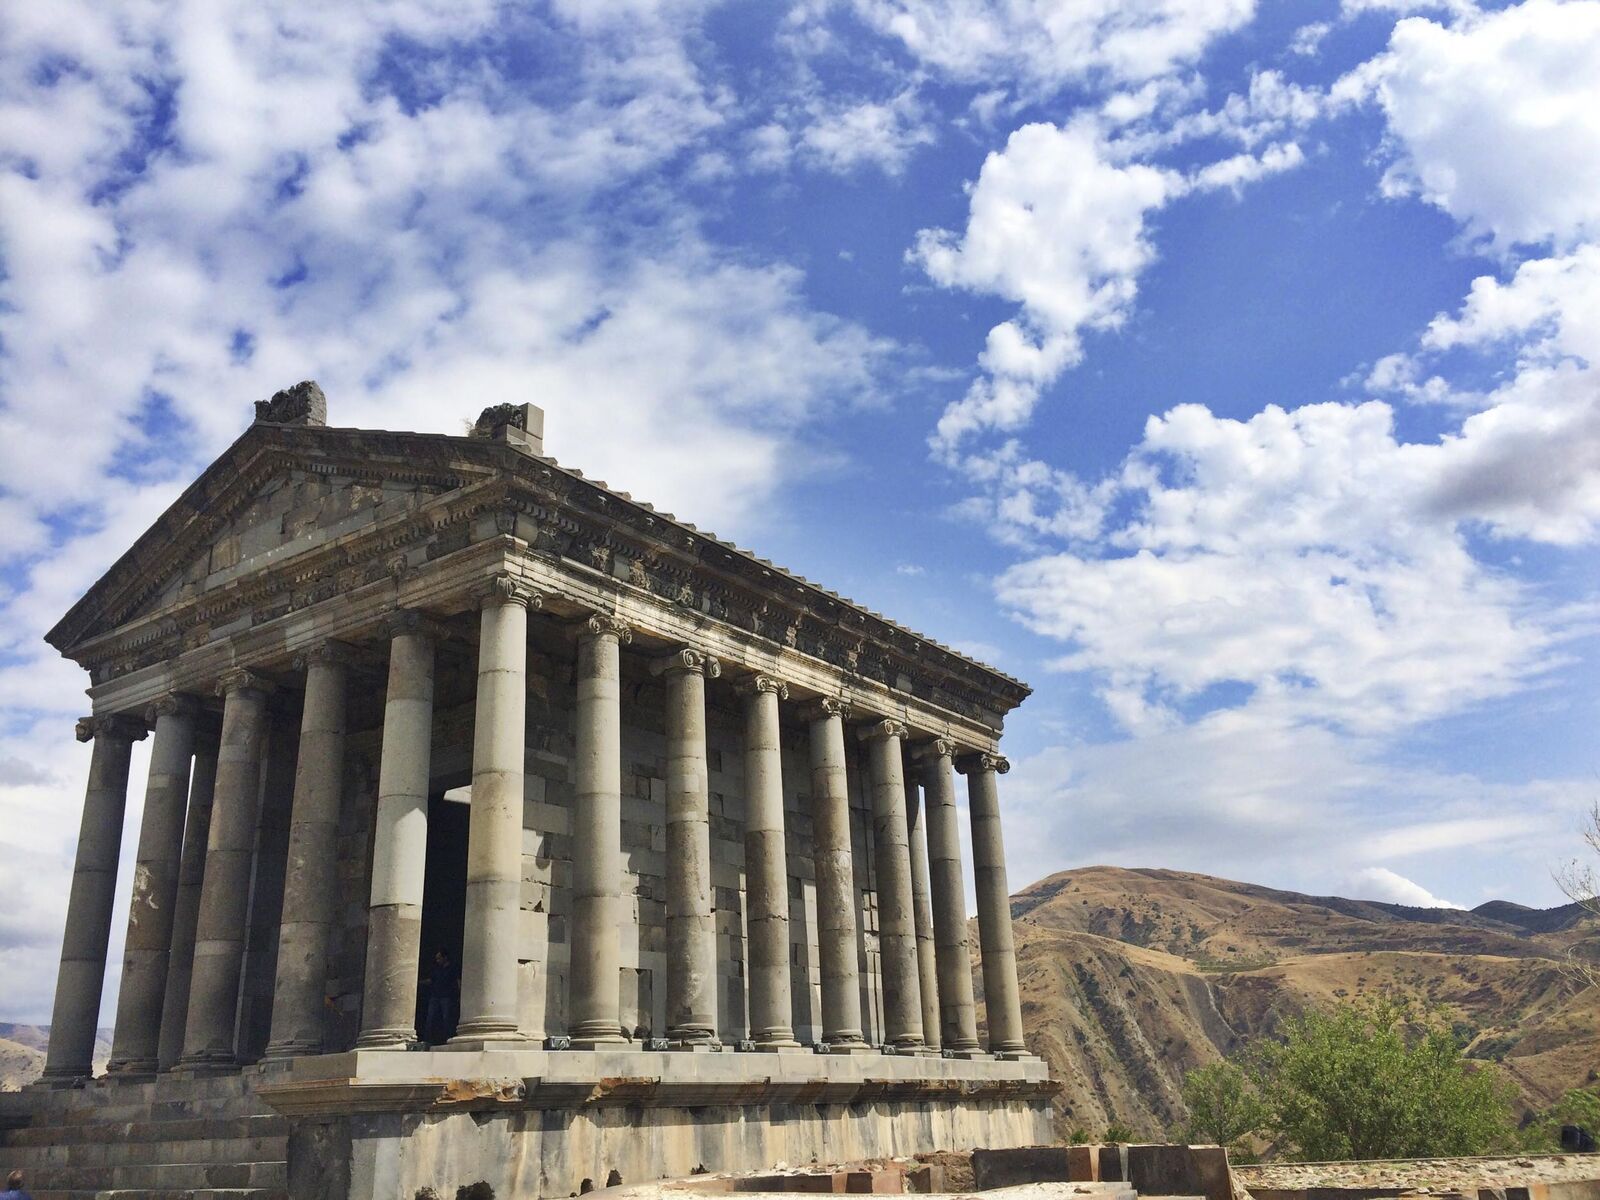 relates to Why You Should Go to Armenia Now, in 15 Inspiring Photos